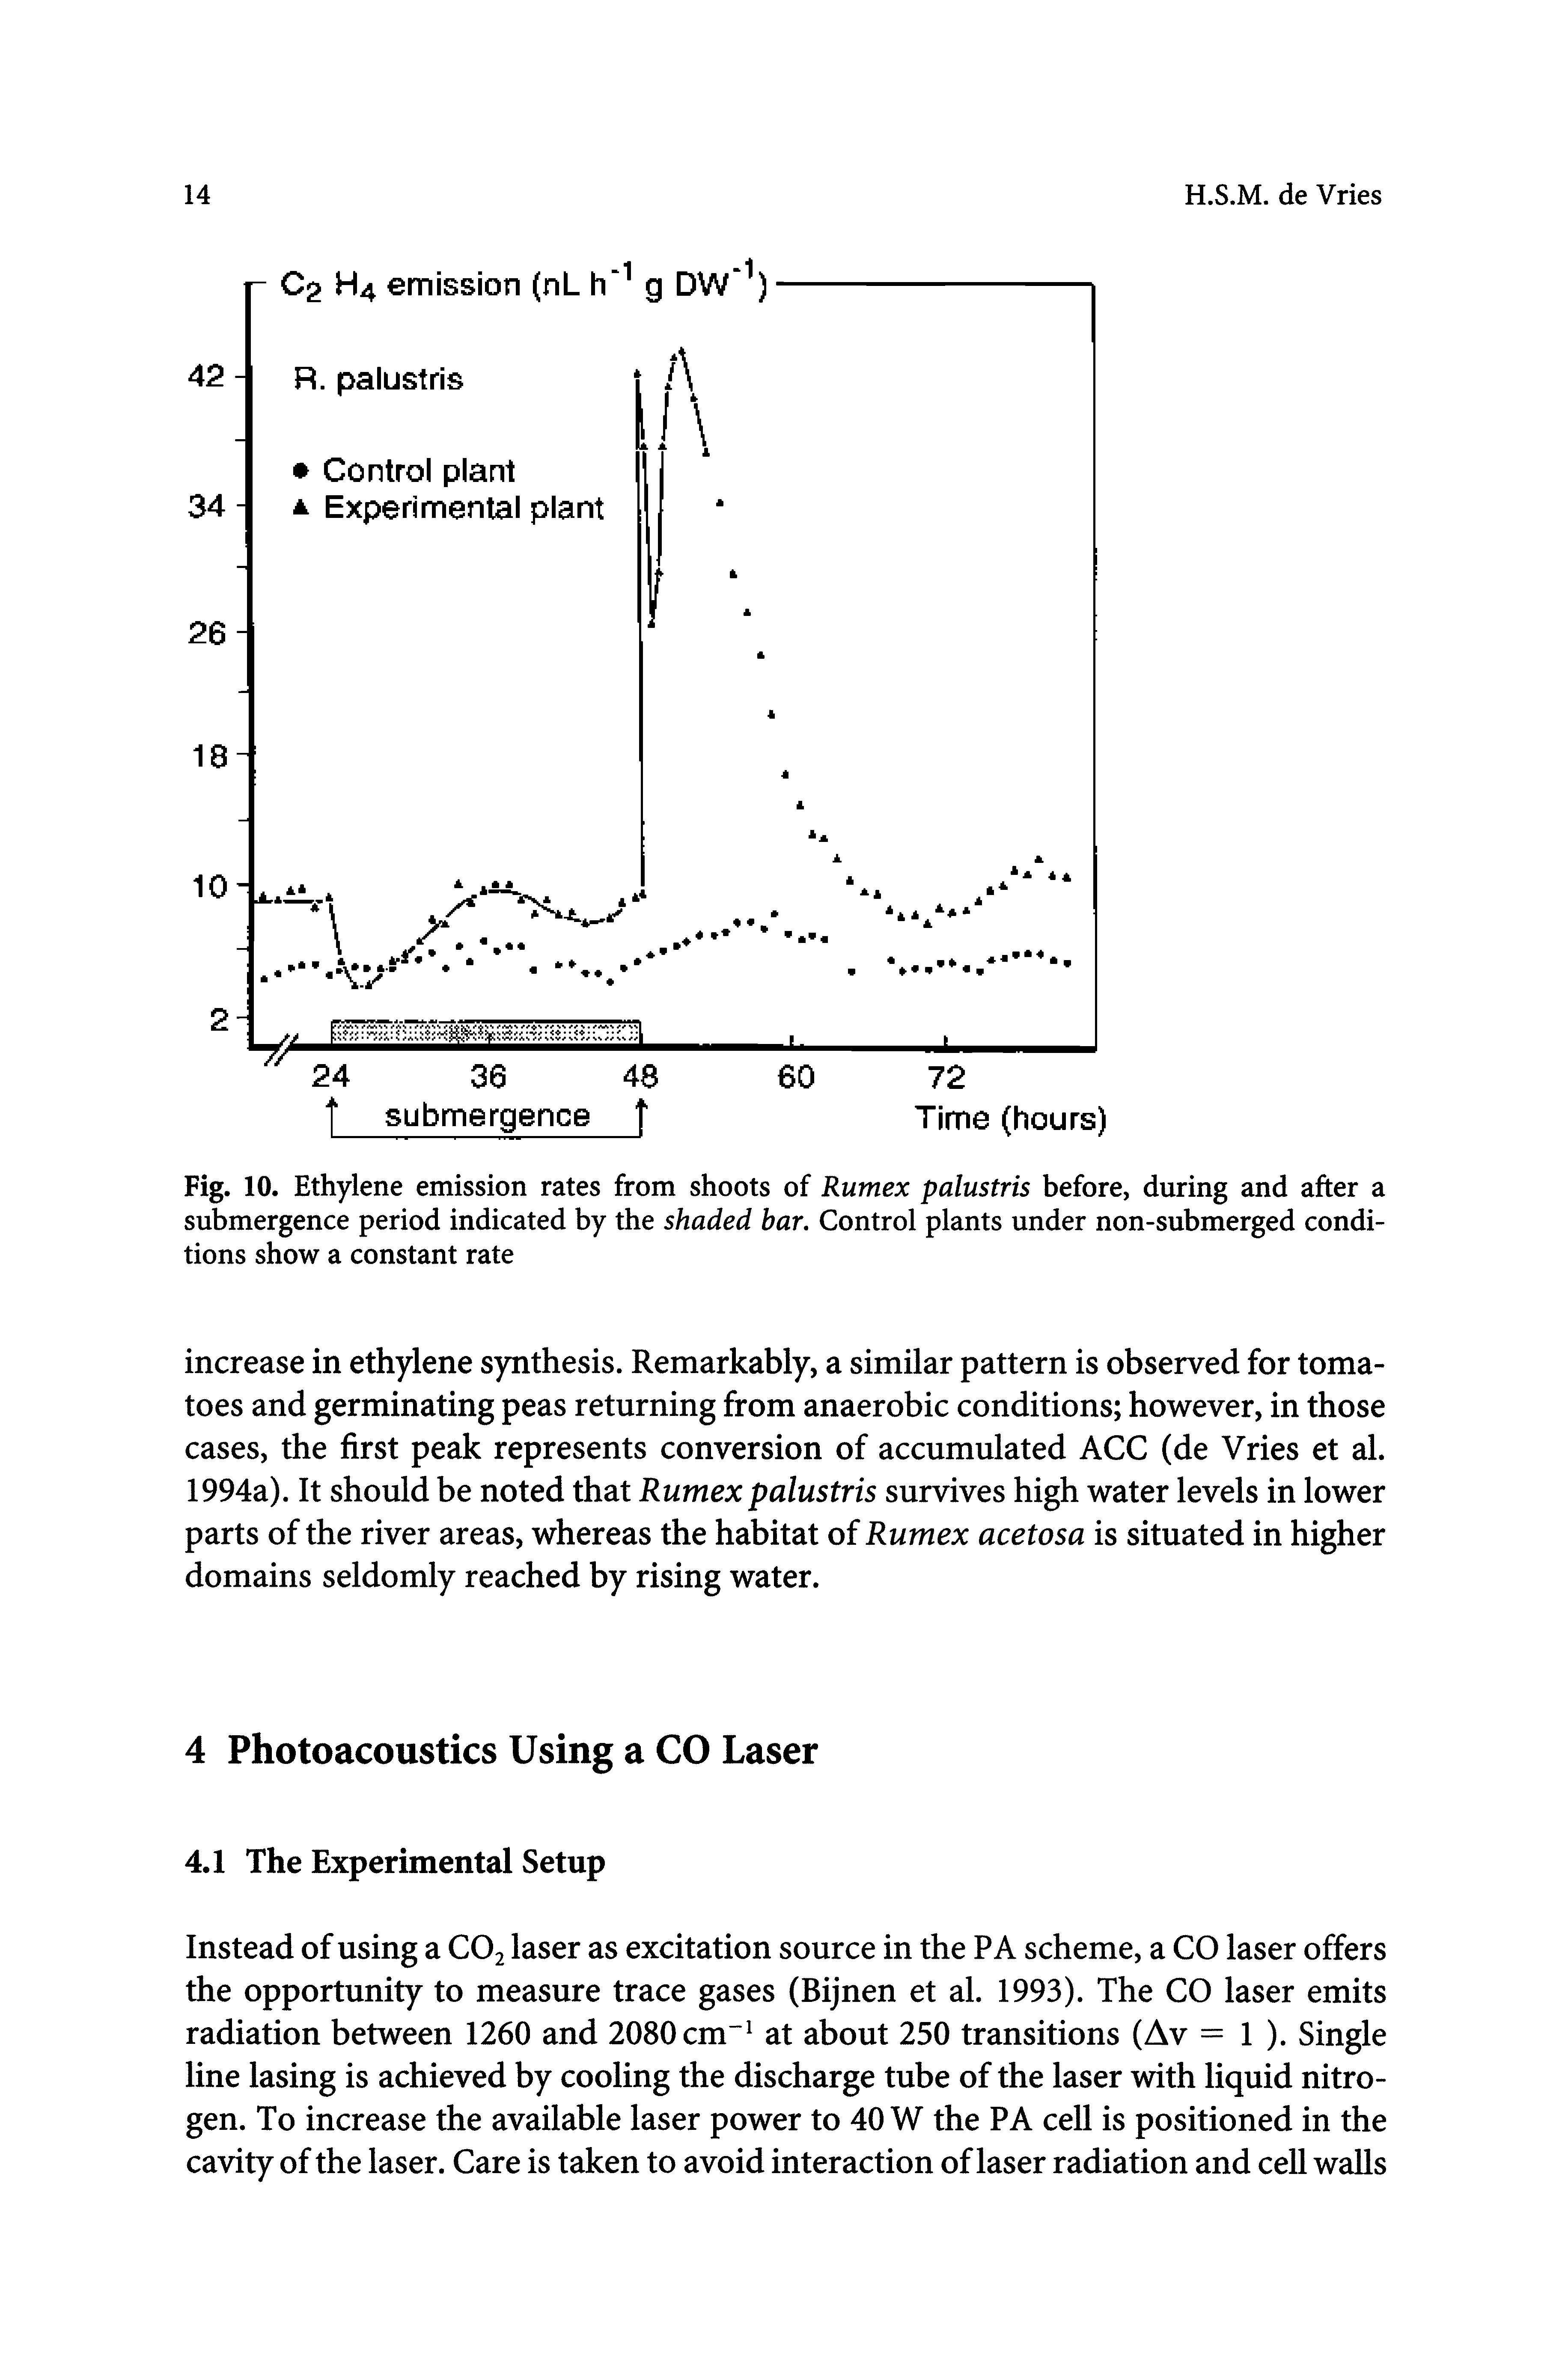 Fig. 10. Ethylene emission rates from shoots of Rumex palustris before, during and after a submergence period indicated by the shaded bar. Control plants under non-submerged conditions show a constant rate...